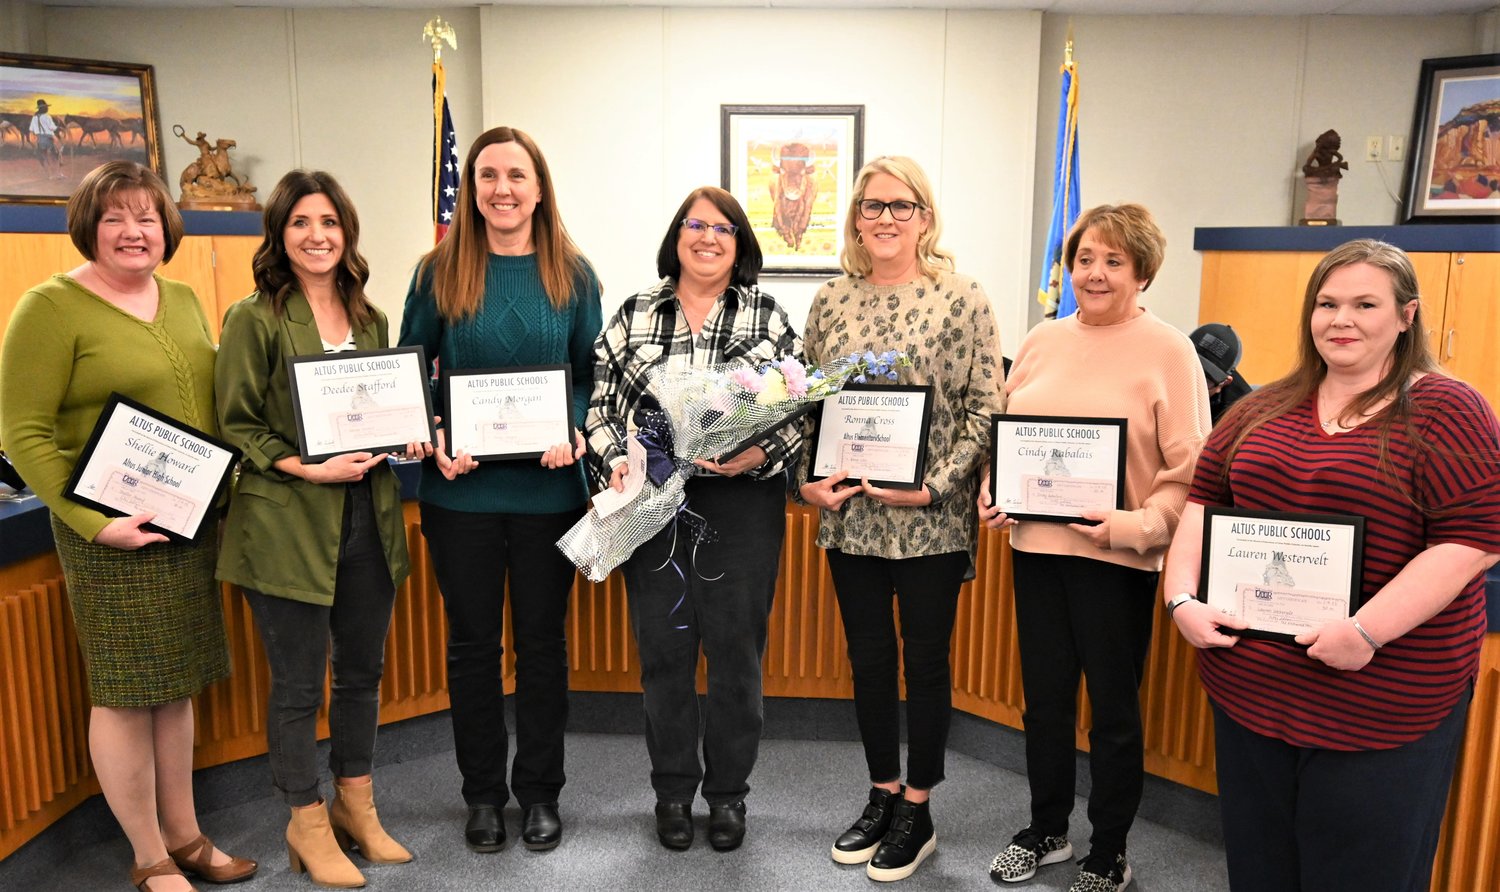 Altus Public Schools 2023 Teachers of the Year for each campus were presented Jan. 9 at the board of education meeting. Rhonda Garrison, center, high school English, was a Top 3 candidate and won the grand prize as Teacher of the Year. Other candidates: left, Shellie Howard, junior high (Top 3); Deedee Stafford, intermediate; Candy Morgan, Rivers; Ronna Cross, elementary (Top 3); Cindy Rabalais, primary; Lauren Westervelt, AECC. 